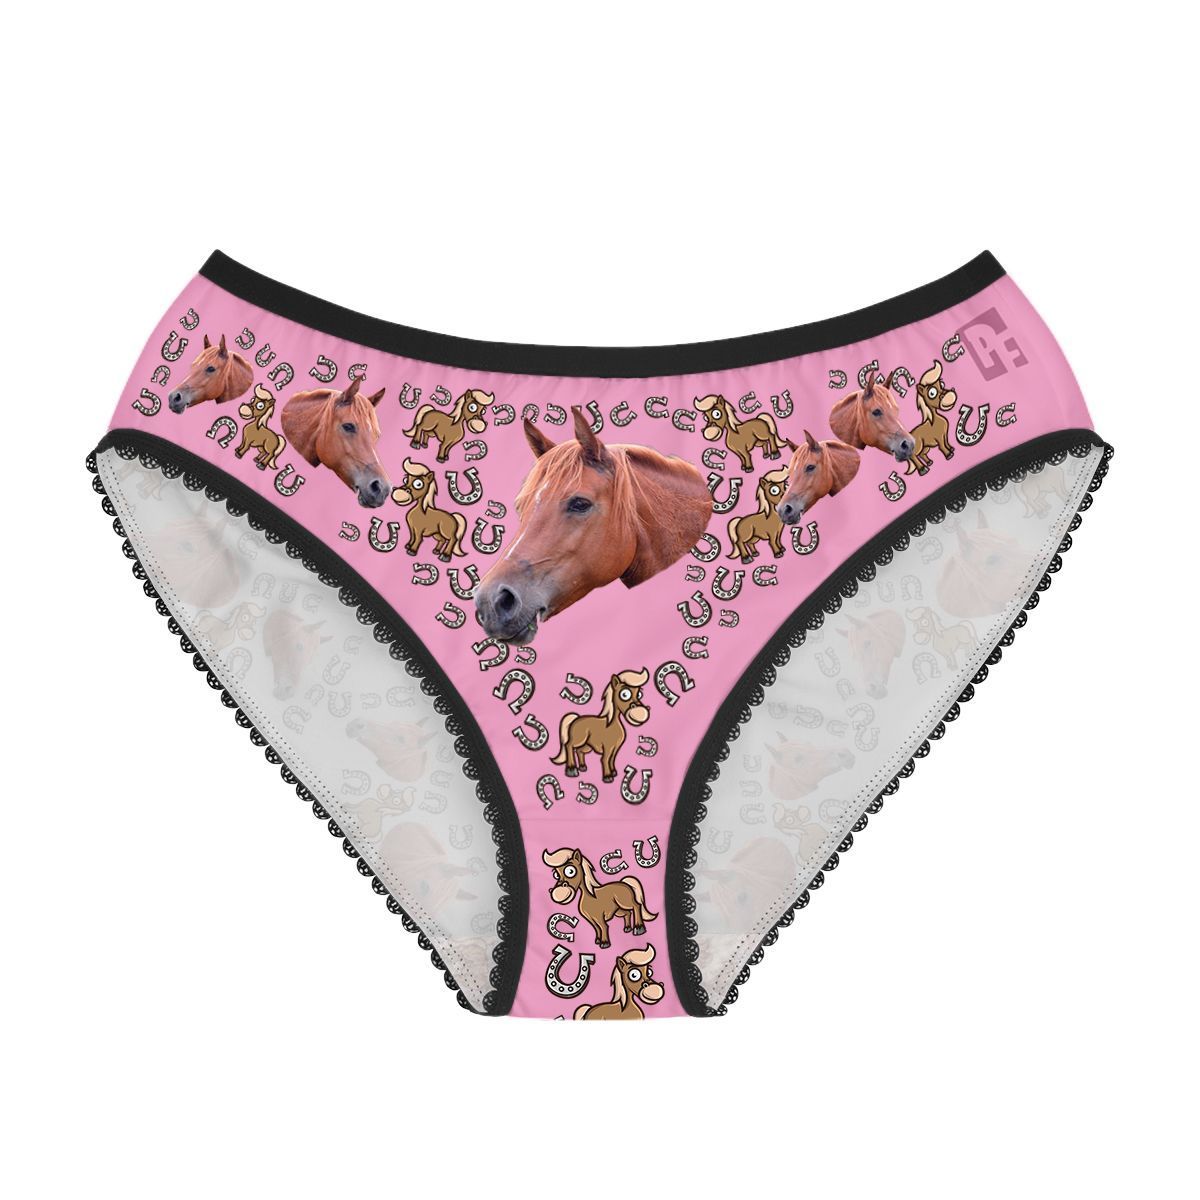 Pink Horse women's underwear briefs personalized with photo printed on them